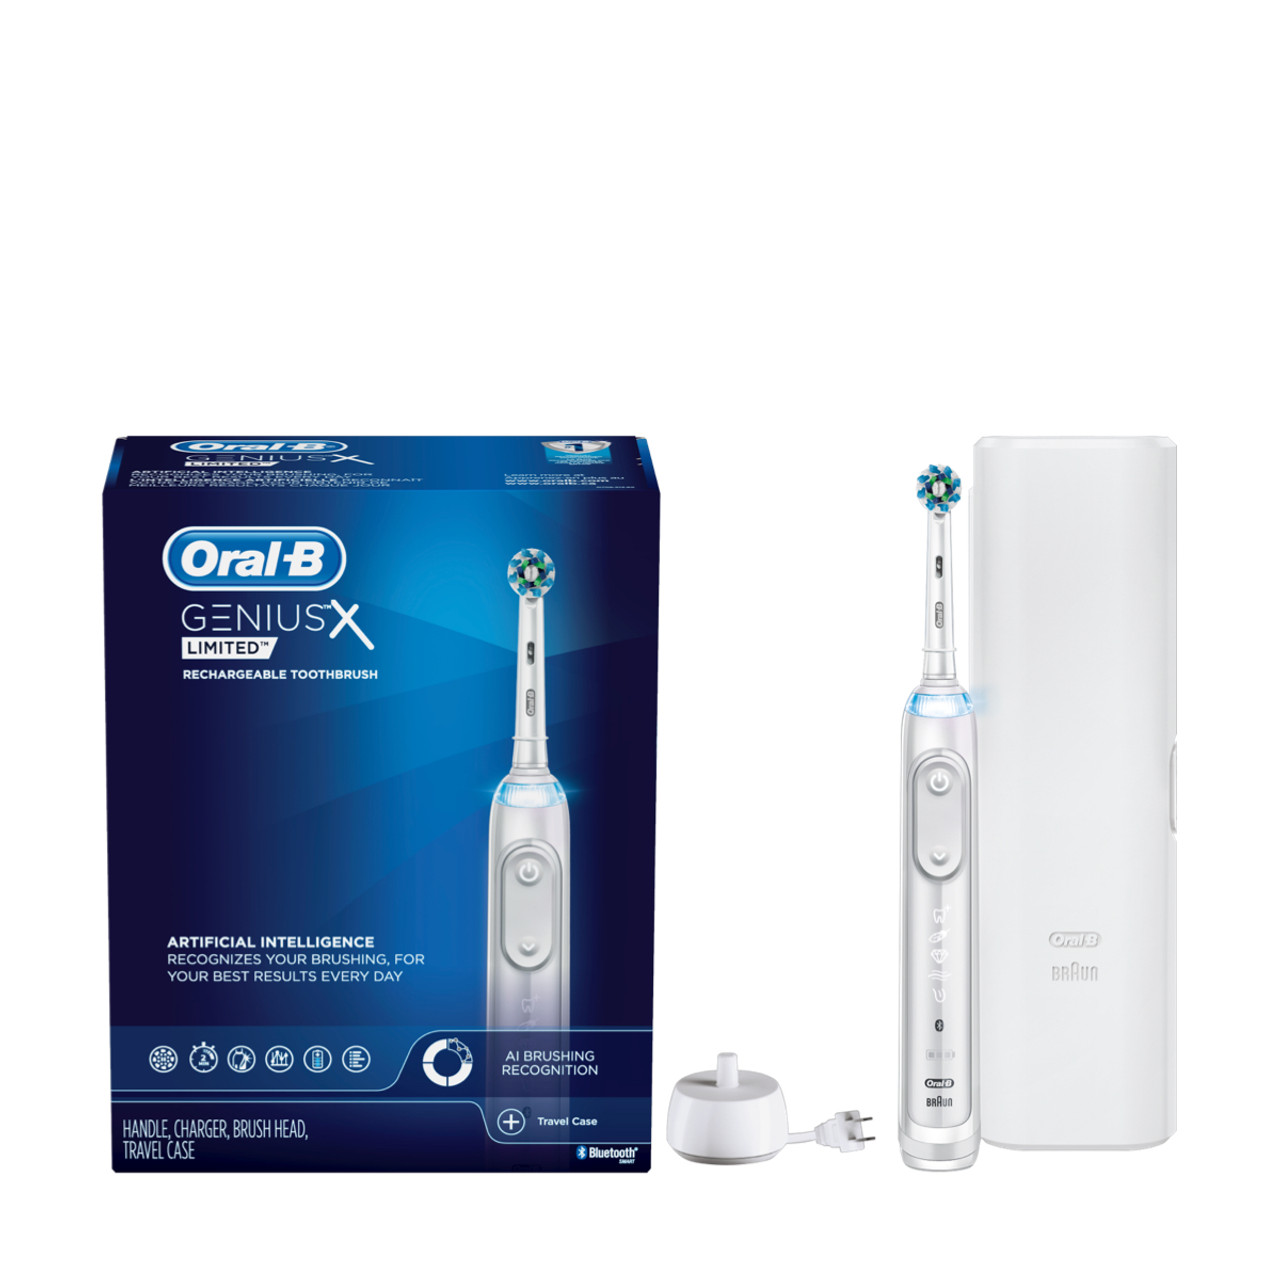 Genius X Limited Electric Toothbrush Oral-B